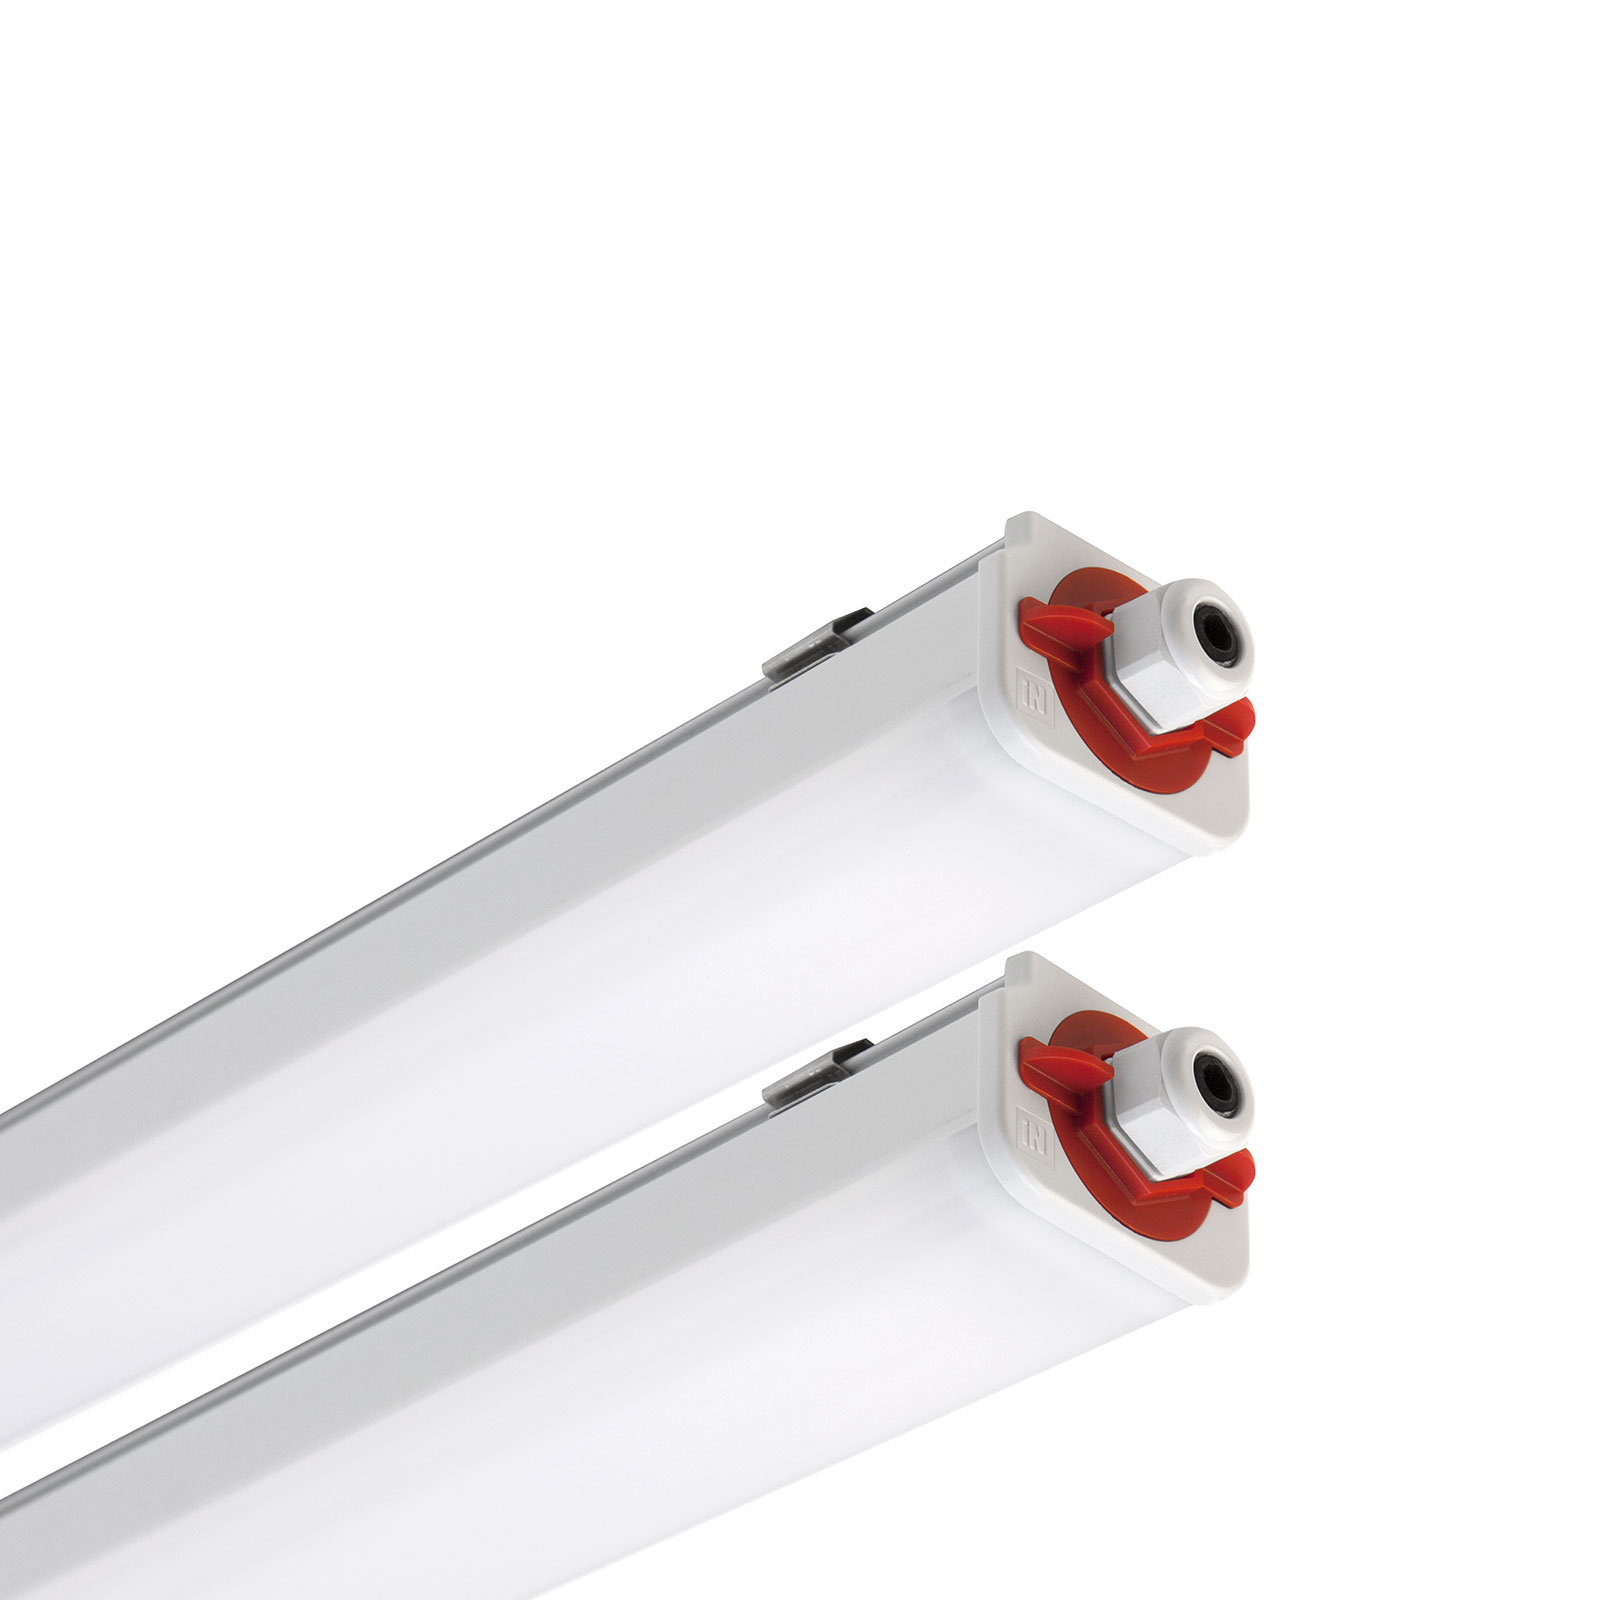 LED-kattovalaisin Norma+120 CL, 34W, 5134lm 120cm